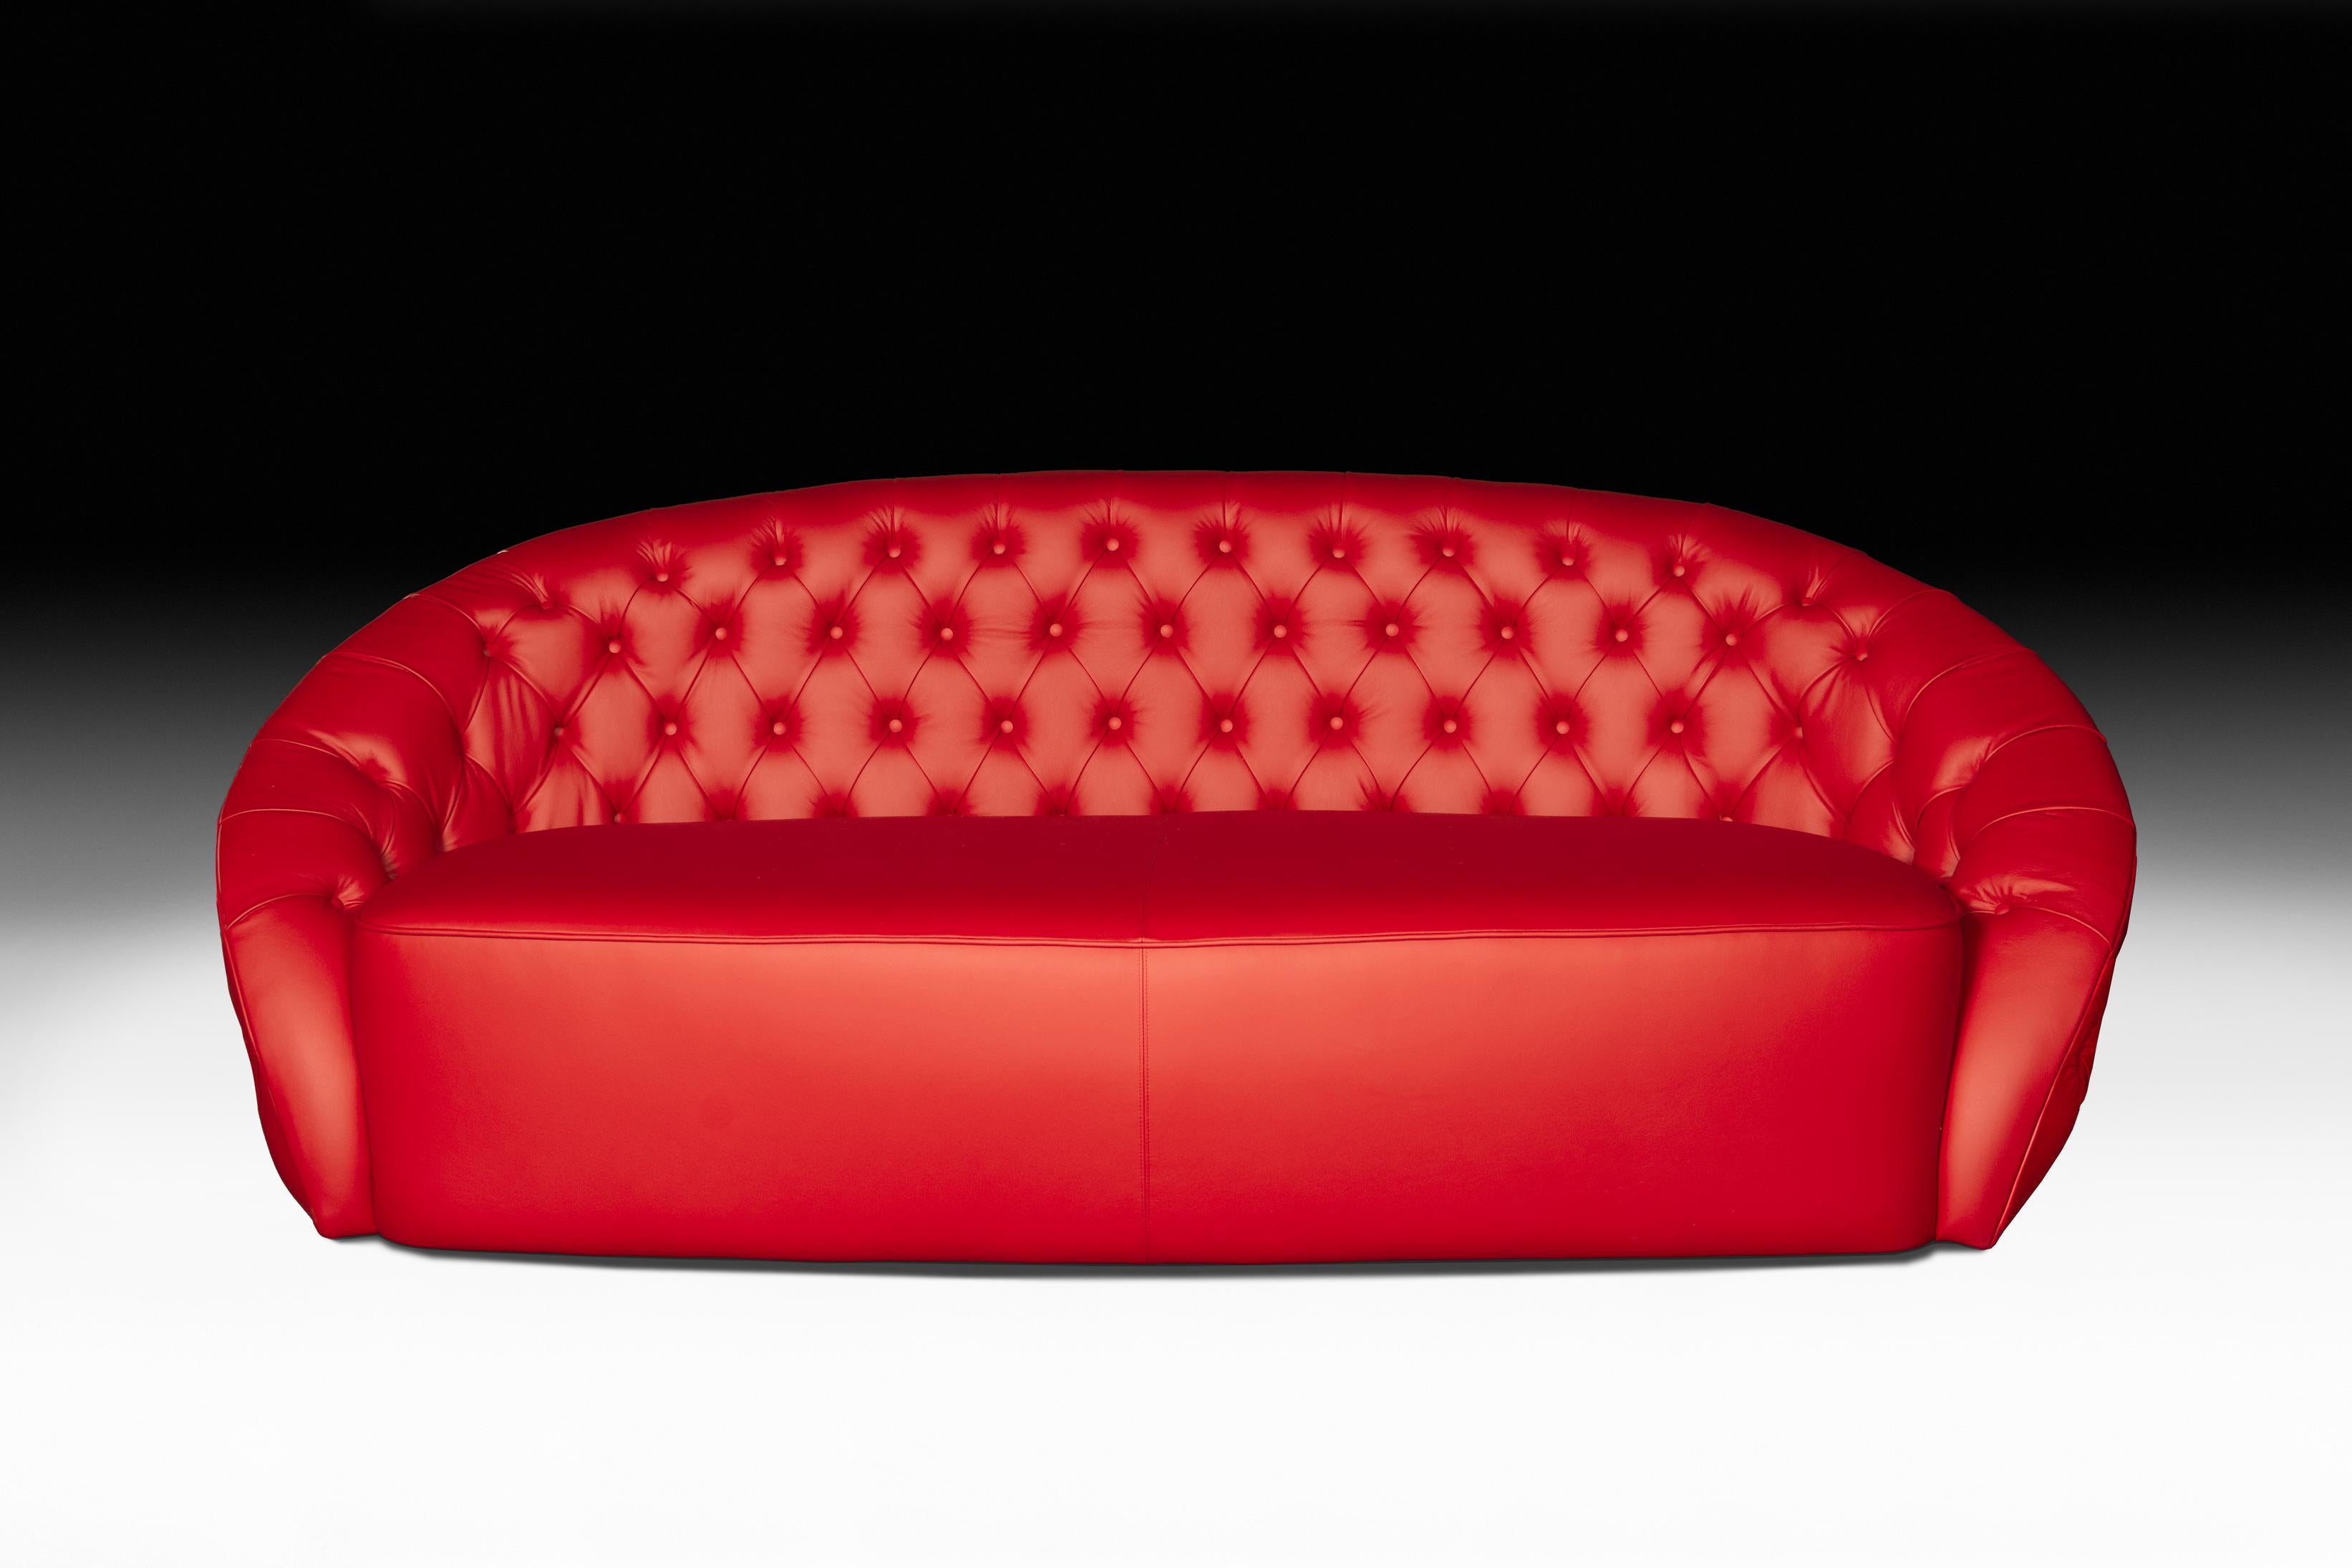 Italian Sofa Round Capitonné, Red Leather, cm 210x115, Made in Italy For Sale